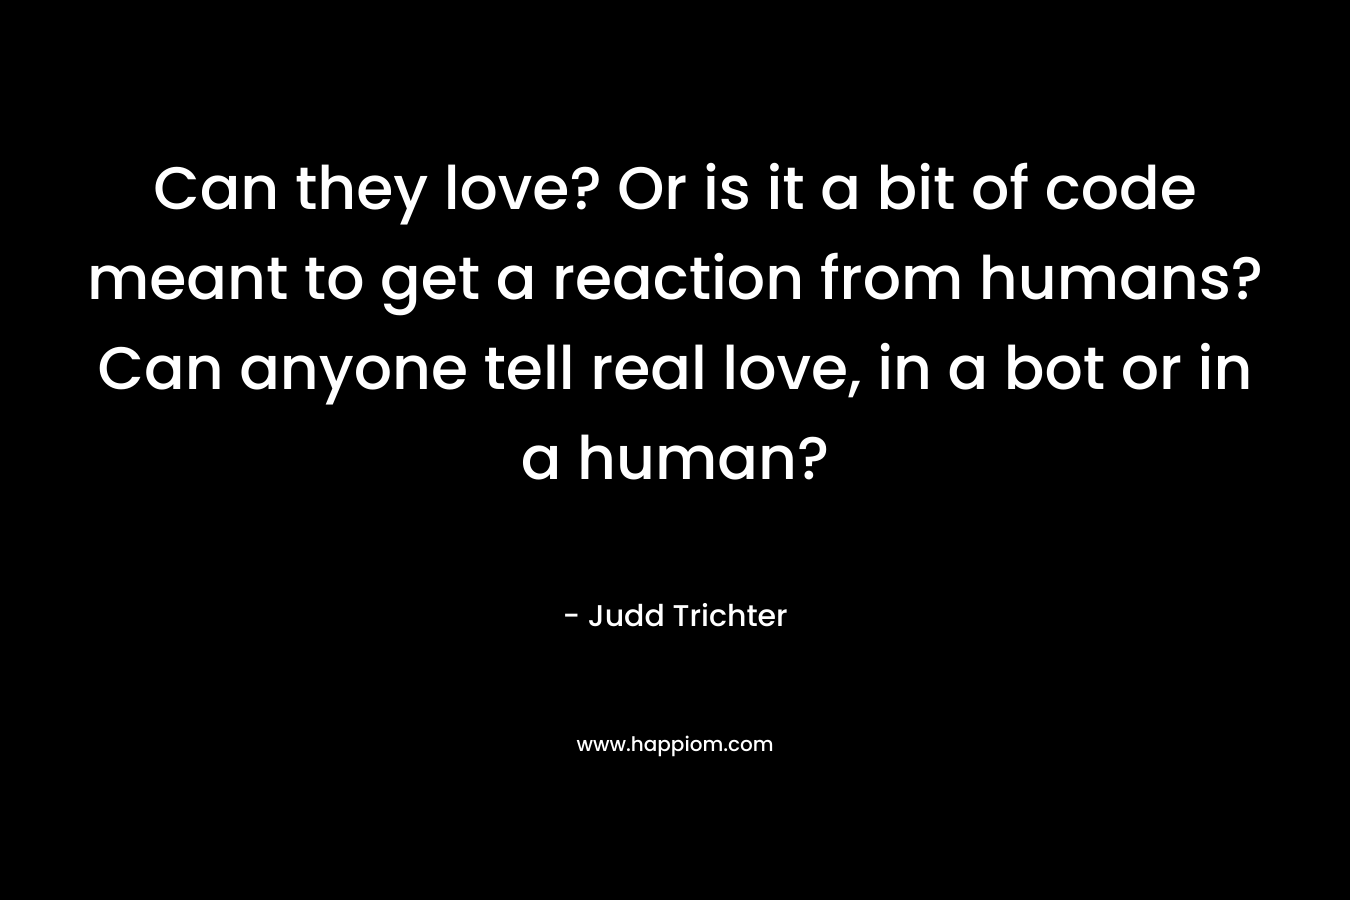 Can they love? Or is it a bit of code meant to get a reaction from humans? Can anyone tell real love, in a bot or in a human?